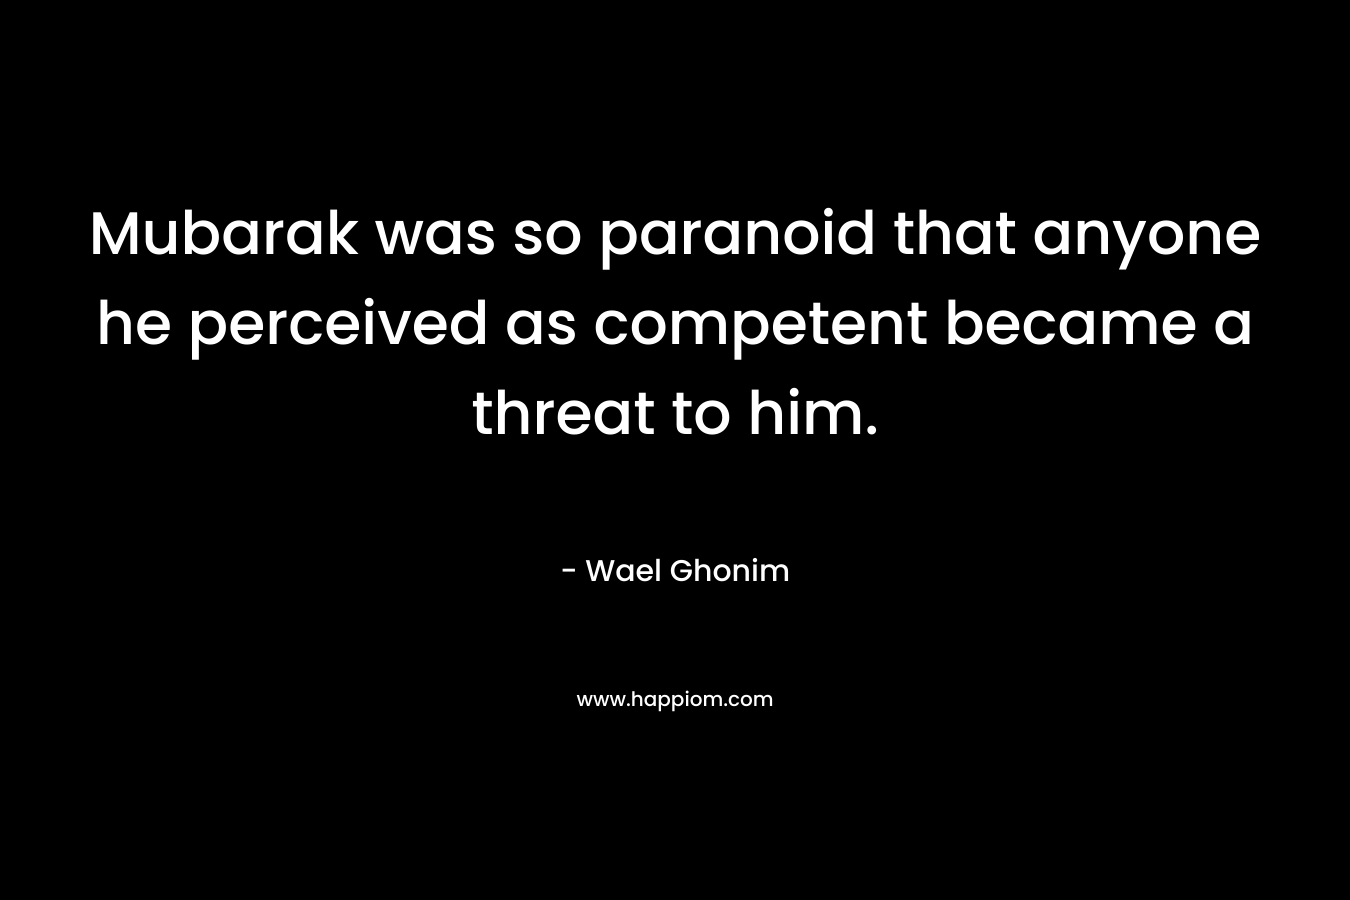 Mubarak was so paranoid that anyone he perceived as competent became a threat to him. – Wael Ghonim